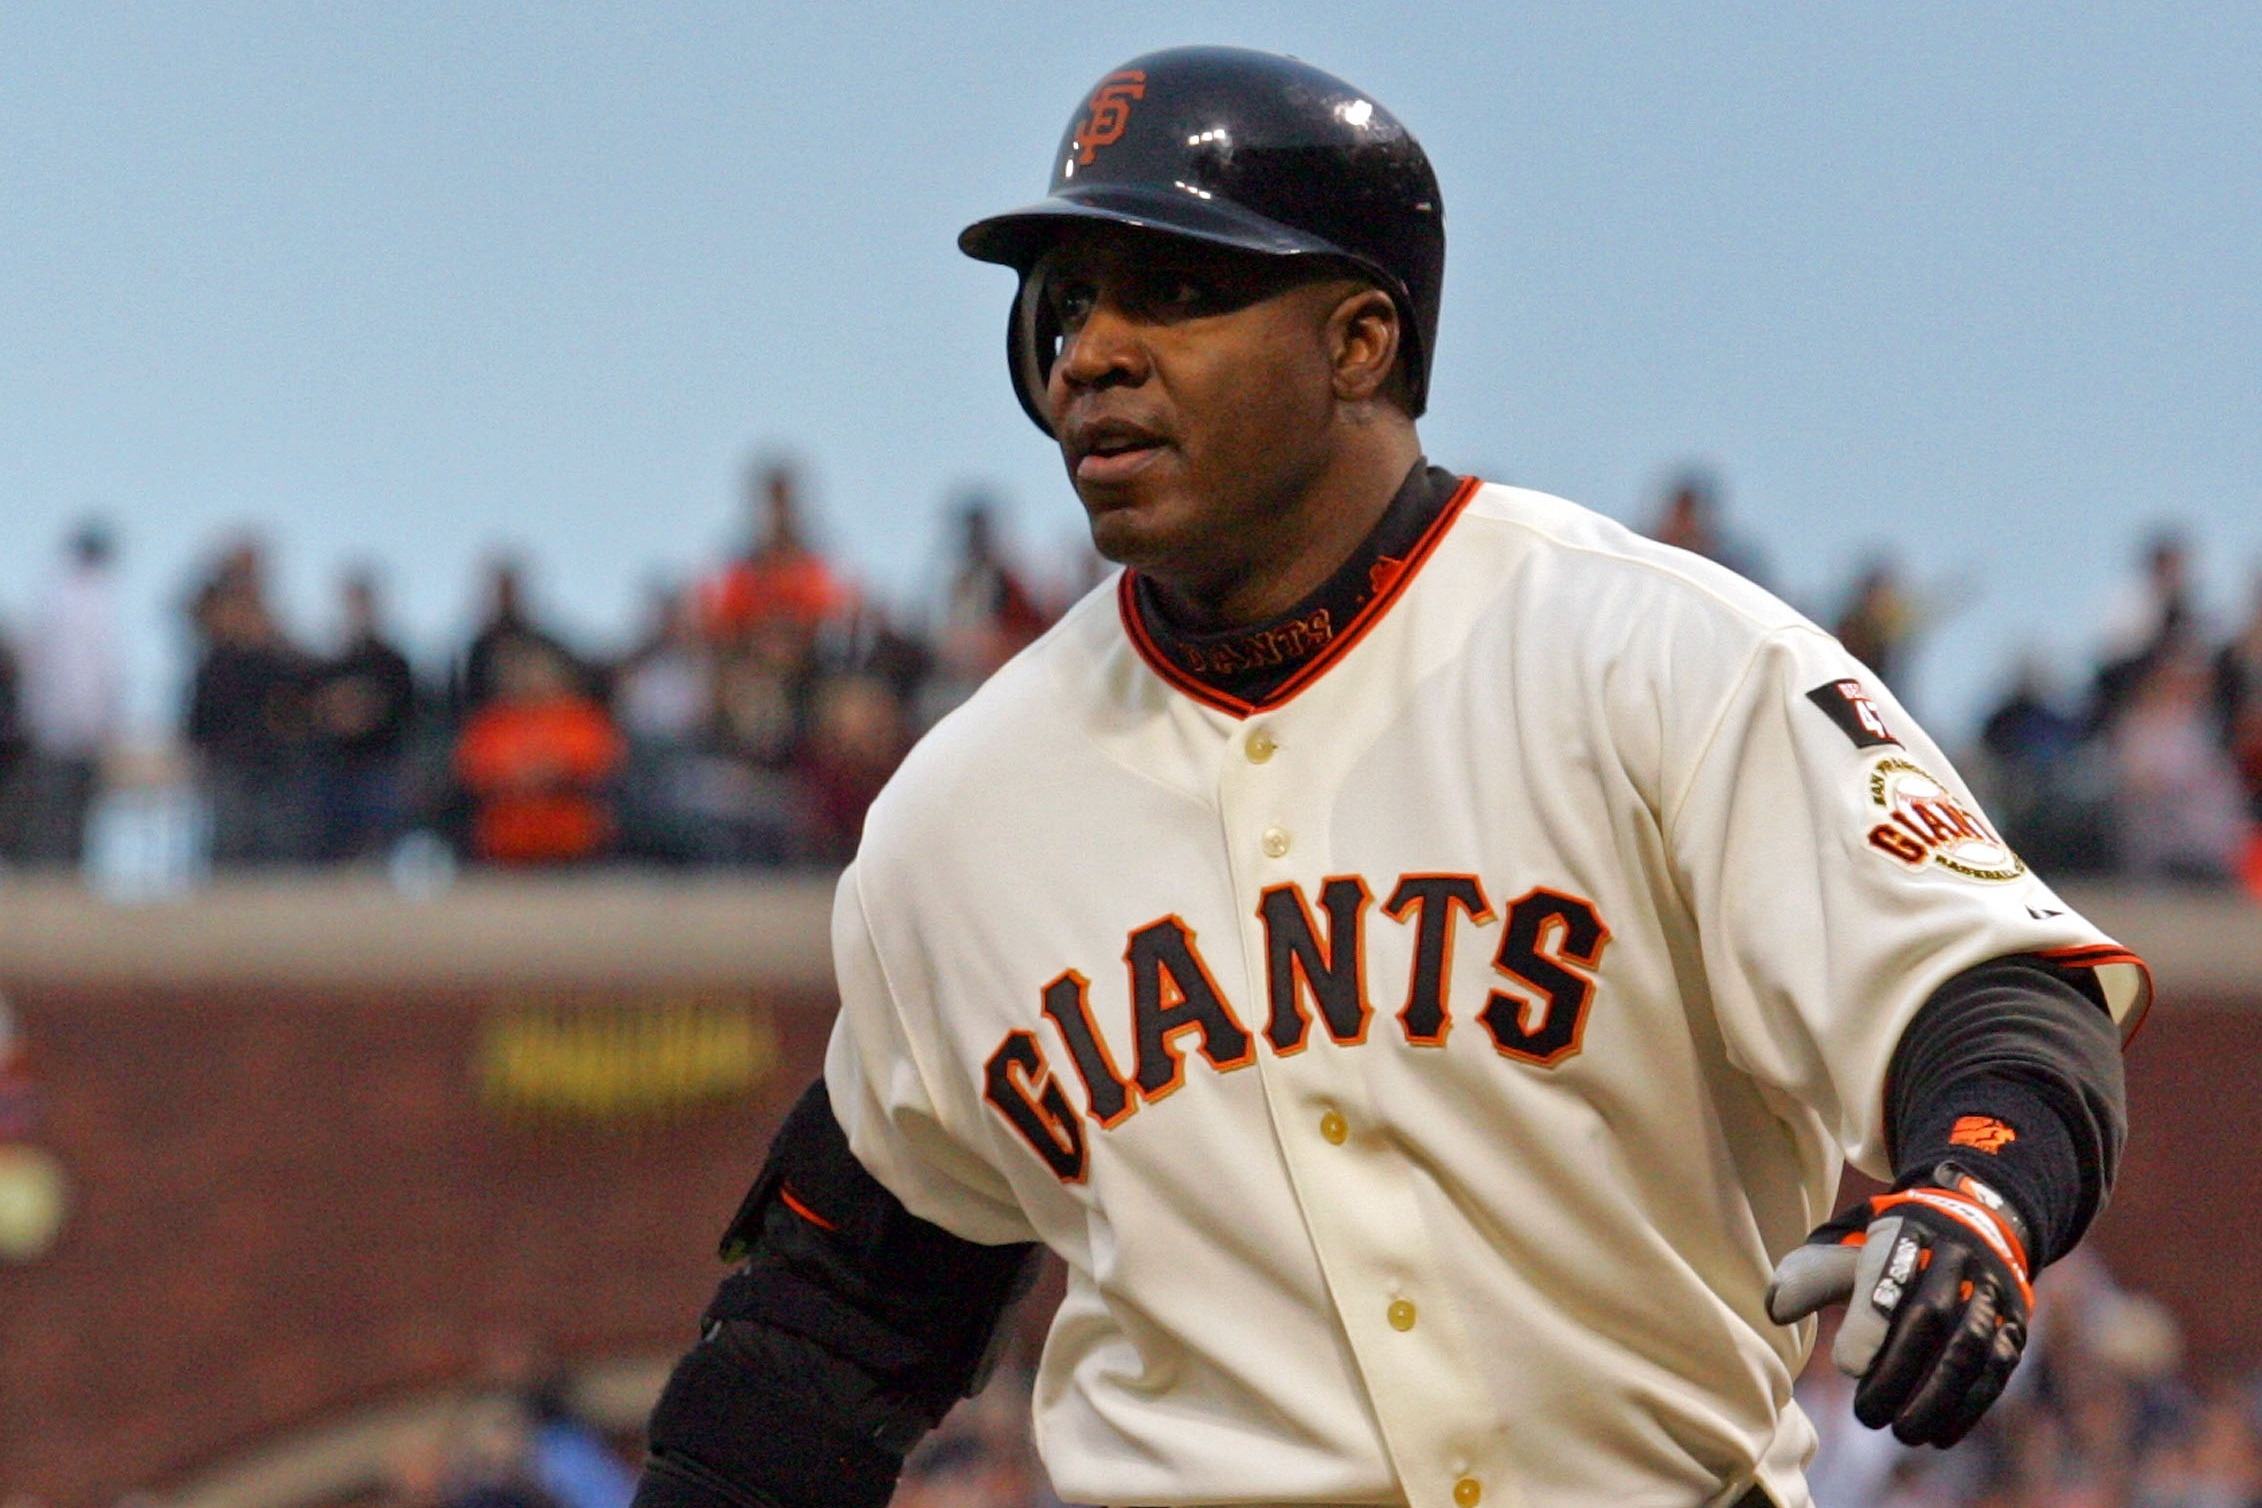 SF Giants: Barry Bonds still hoping for Hall of Fame induction